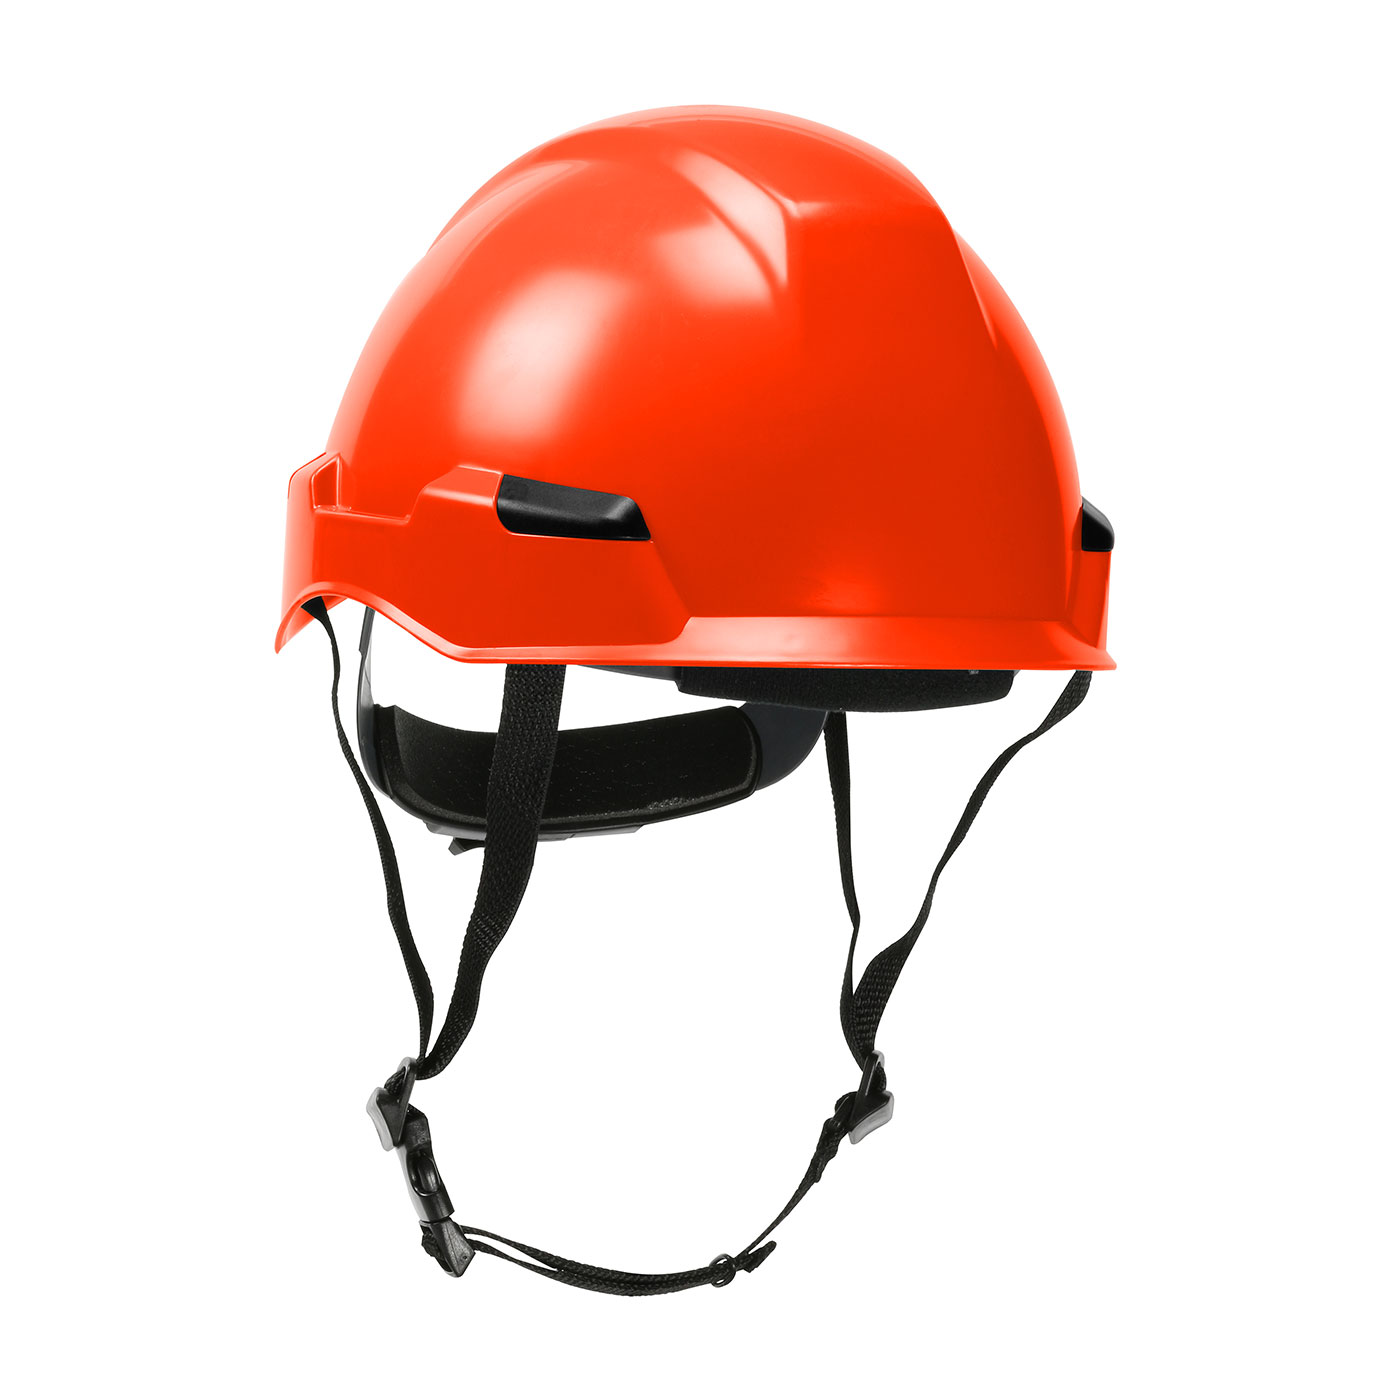 280-HP142R PIP® Dynamic Rocky™ Industrial Climbing Helmet with Polycarbonate / ABS Shell, Hi-Density Foam Impact Liner, Nylon Suspension, Wheel Ratchet Adjustment and 4-Point Chin Strap-Orange